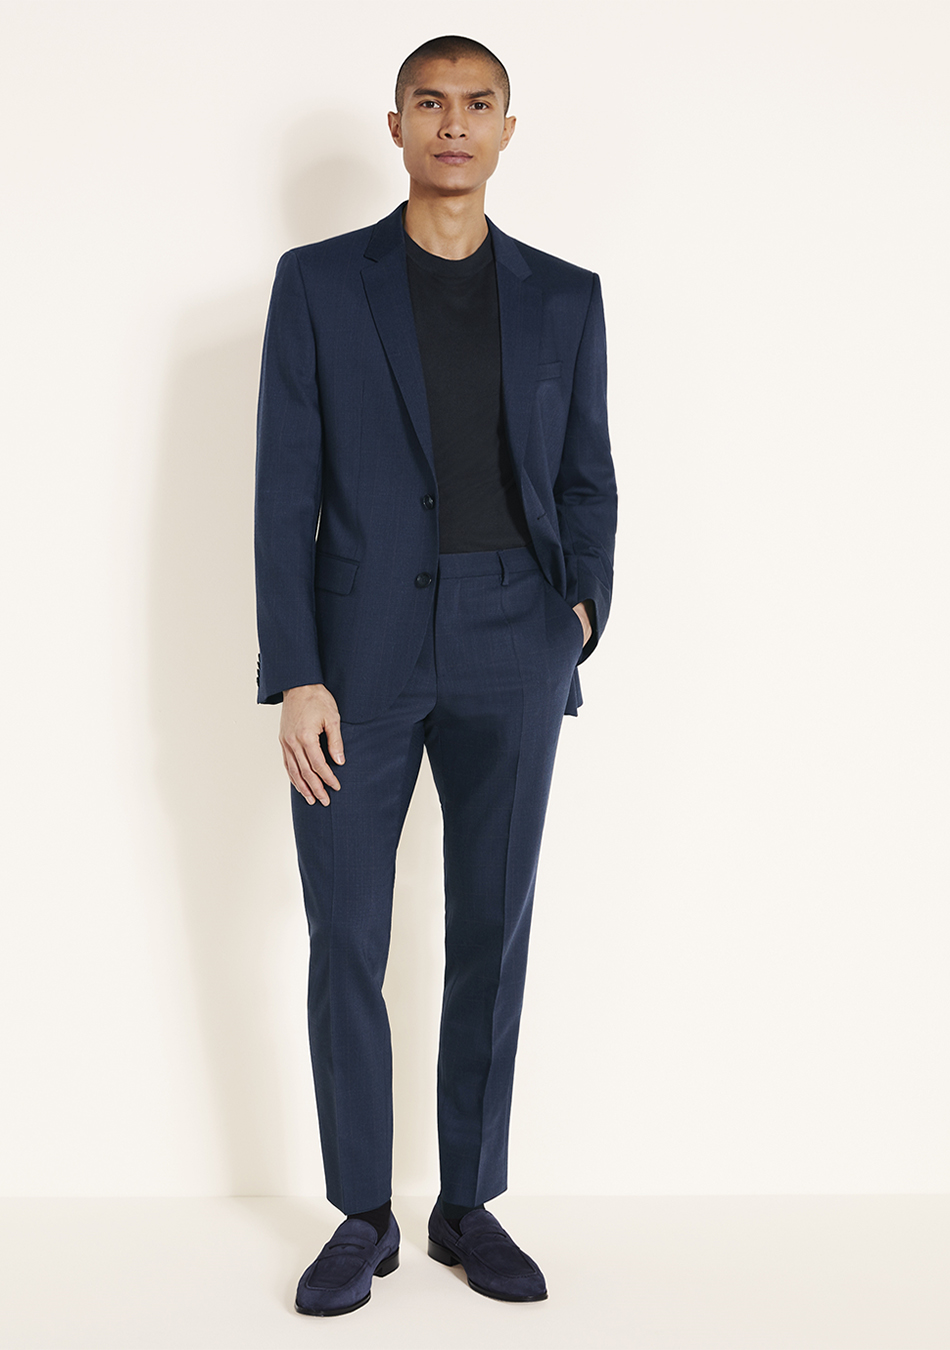 Navy suit, black t-shirt, and navy blue loafers